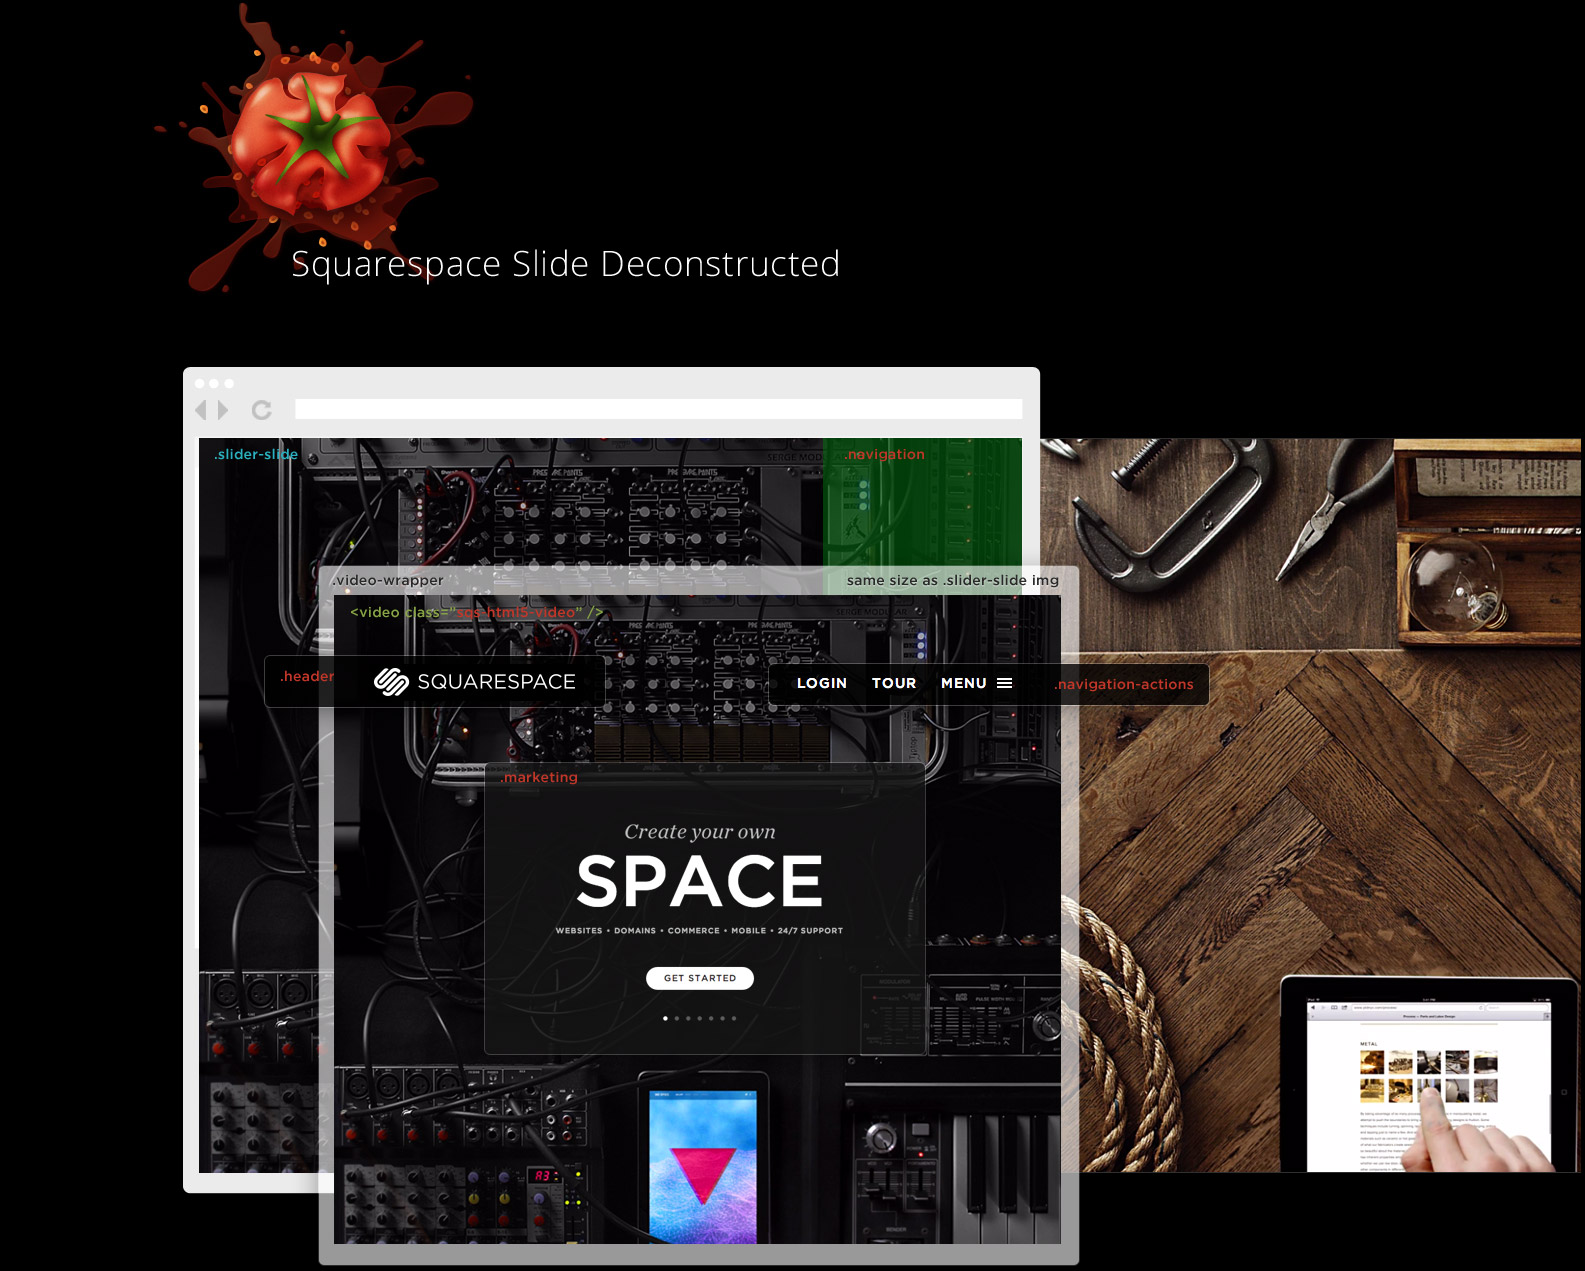 Squarespace.com websited deconstructed